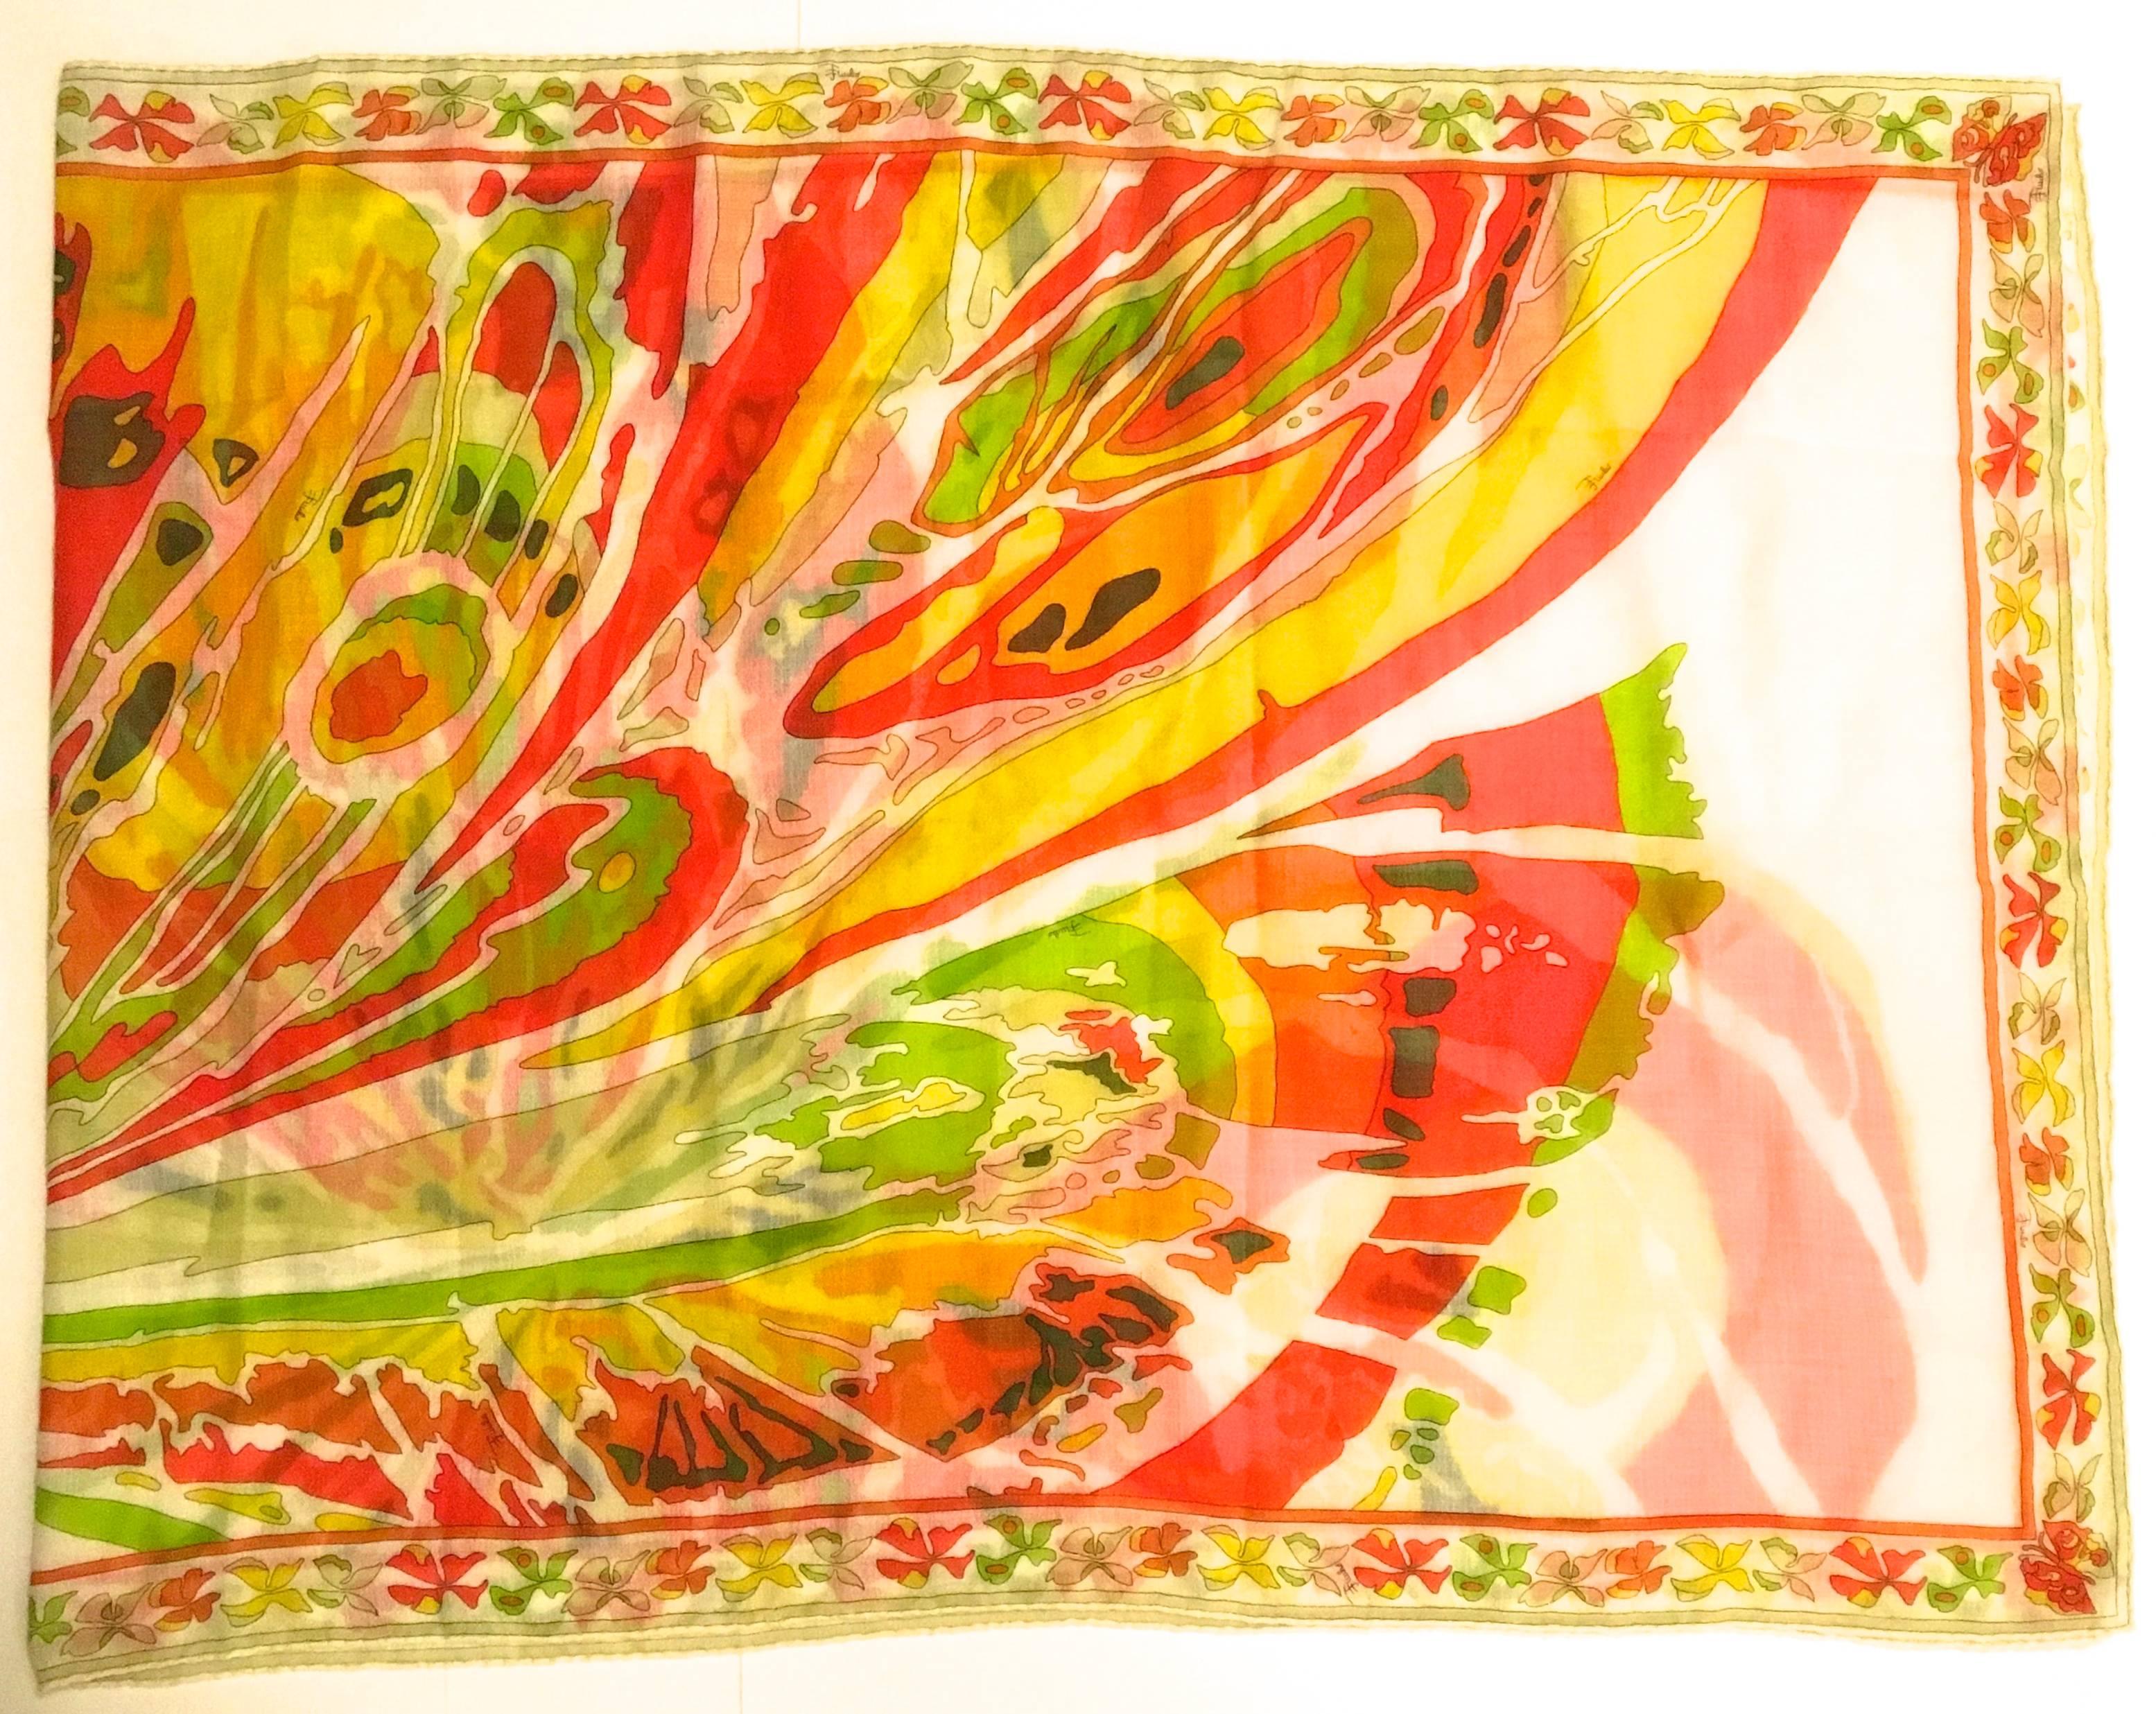 Presented here is a magnificent shawl / scarf from Emilio Pucci. This rare scarf is comprised of a beautiful floral print in colors of green, yellow, white, blue, red and black. The design is a singular flower that appears to have an expansion of